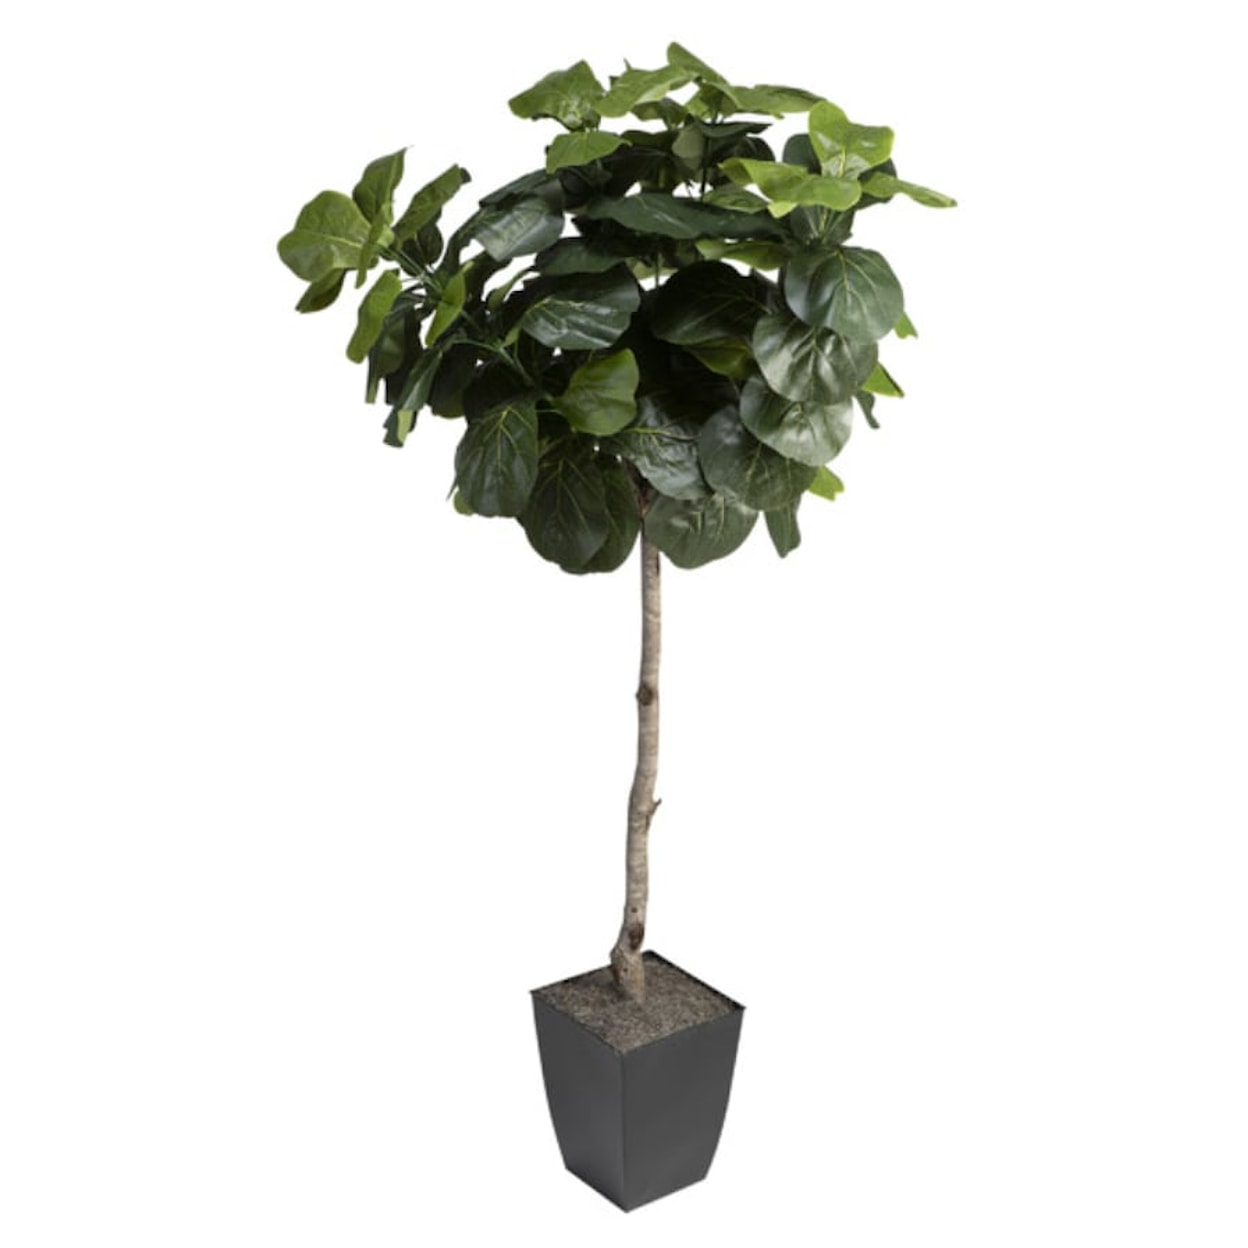 D&W Silks Artificial Trees Fiddle Leaf Fig Tree in Square Metal Planter